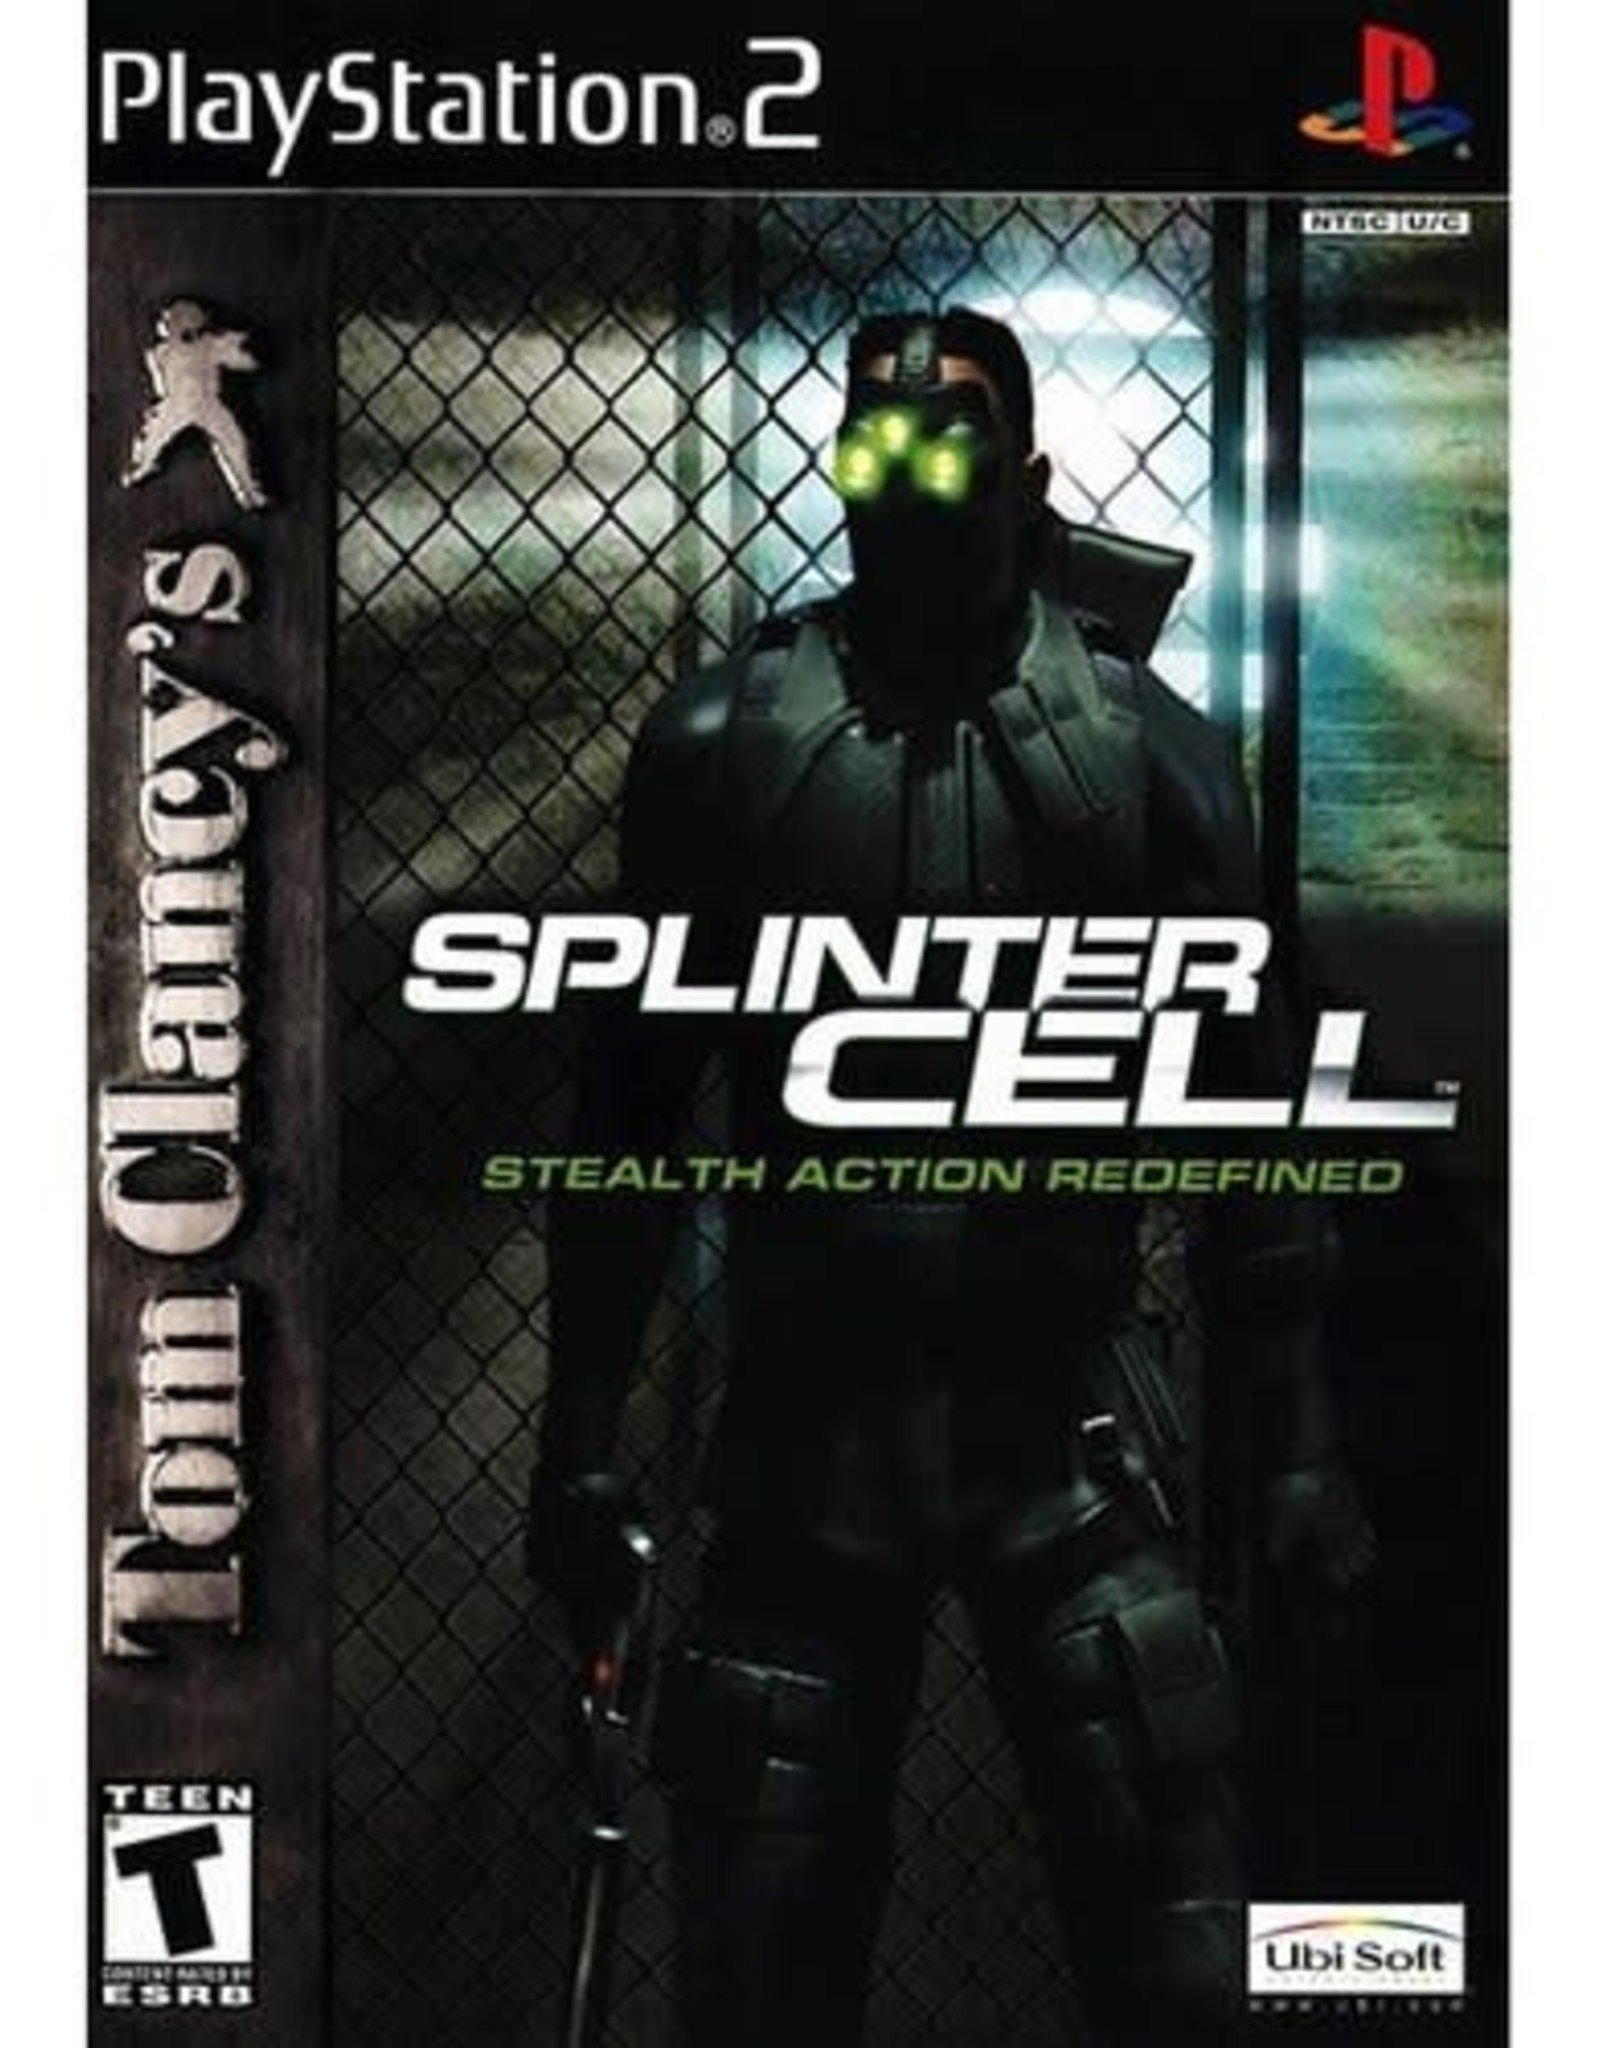 tom clancy ps2